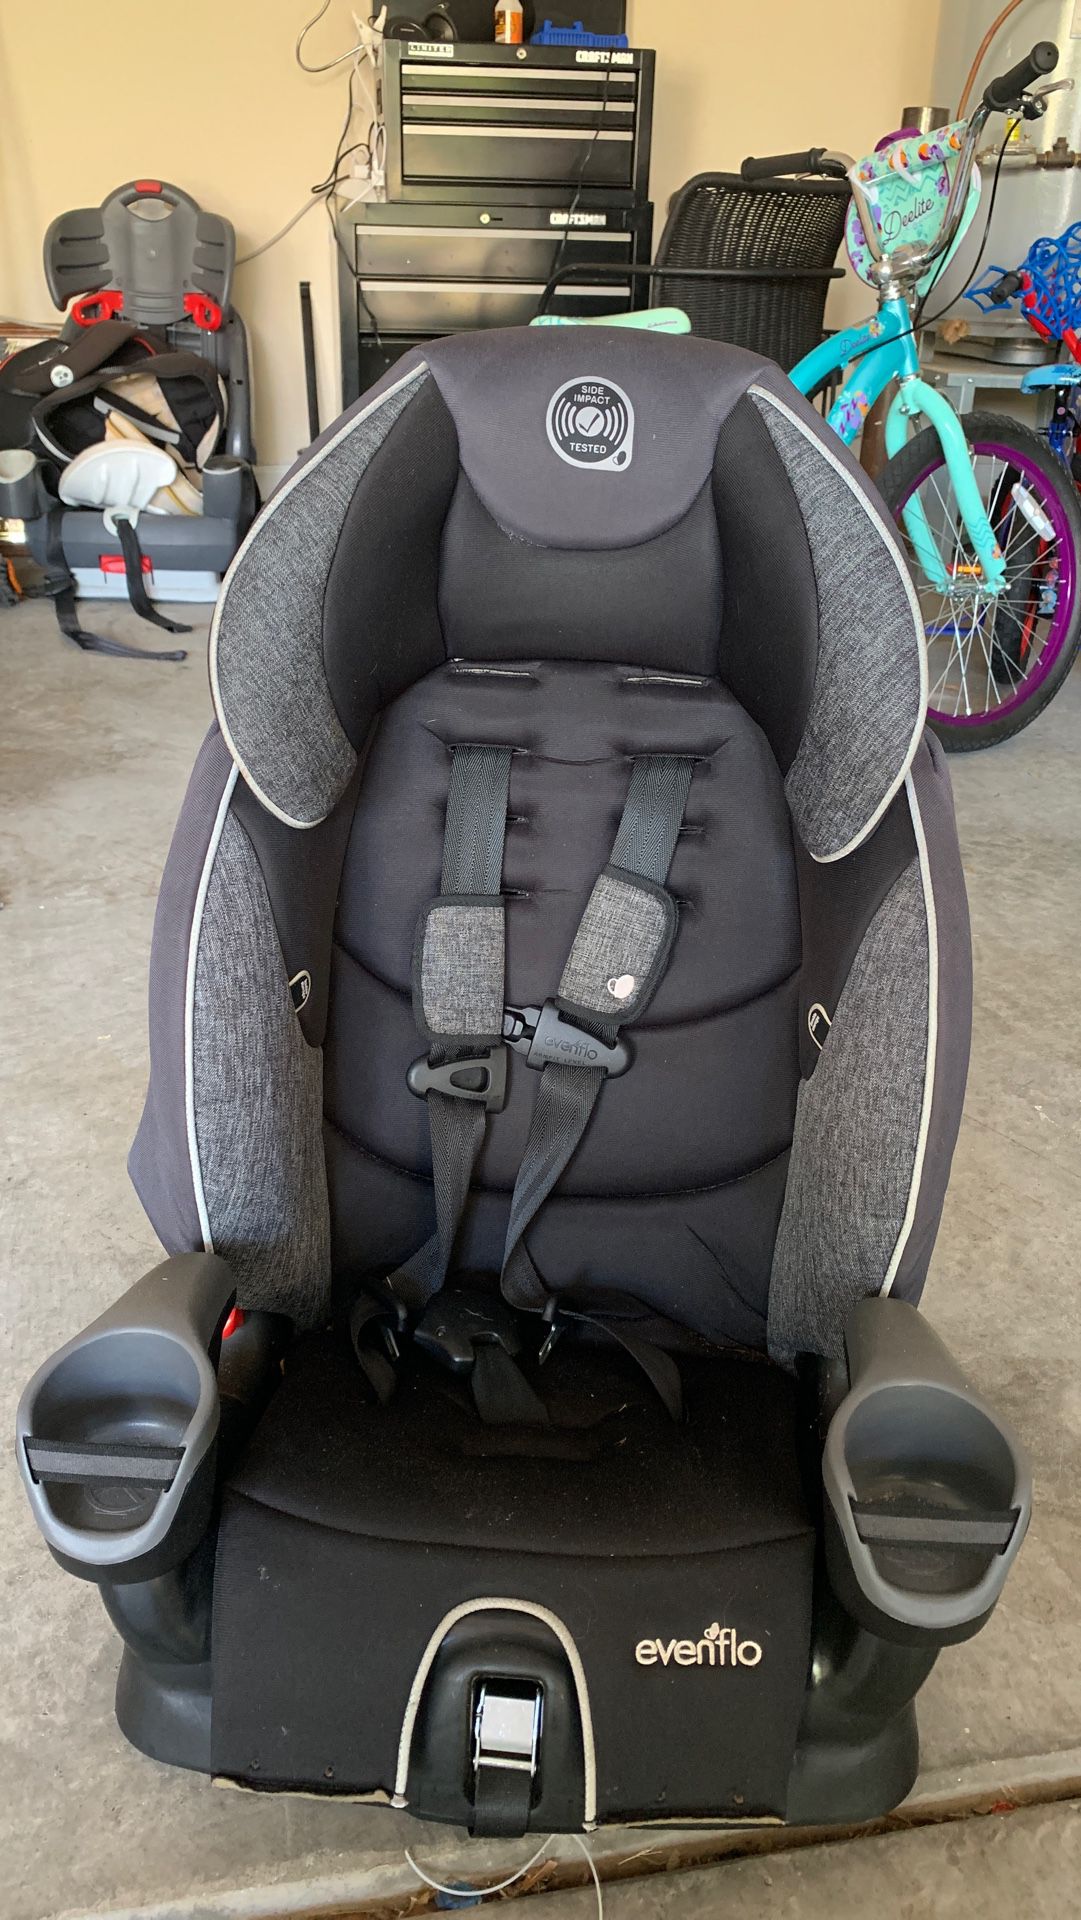 Evenflo Car seat in great condition used 2 months